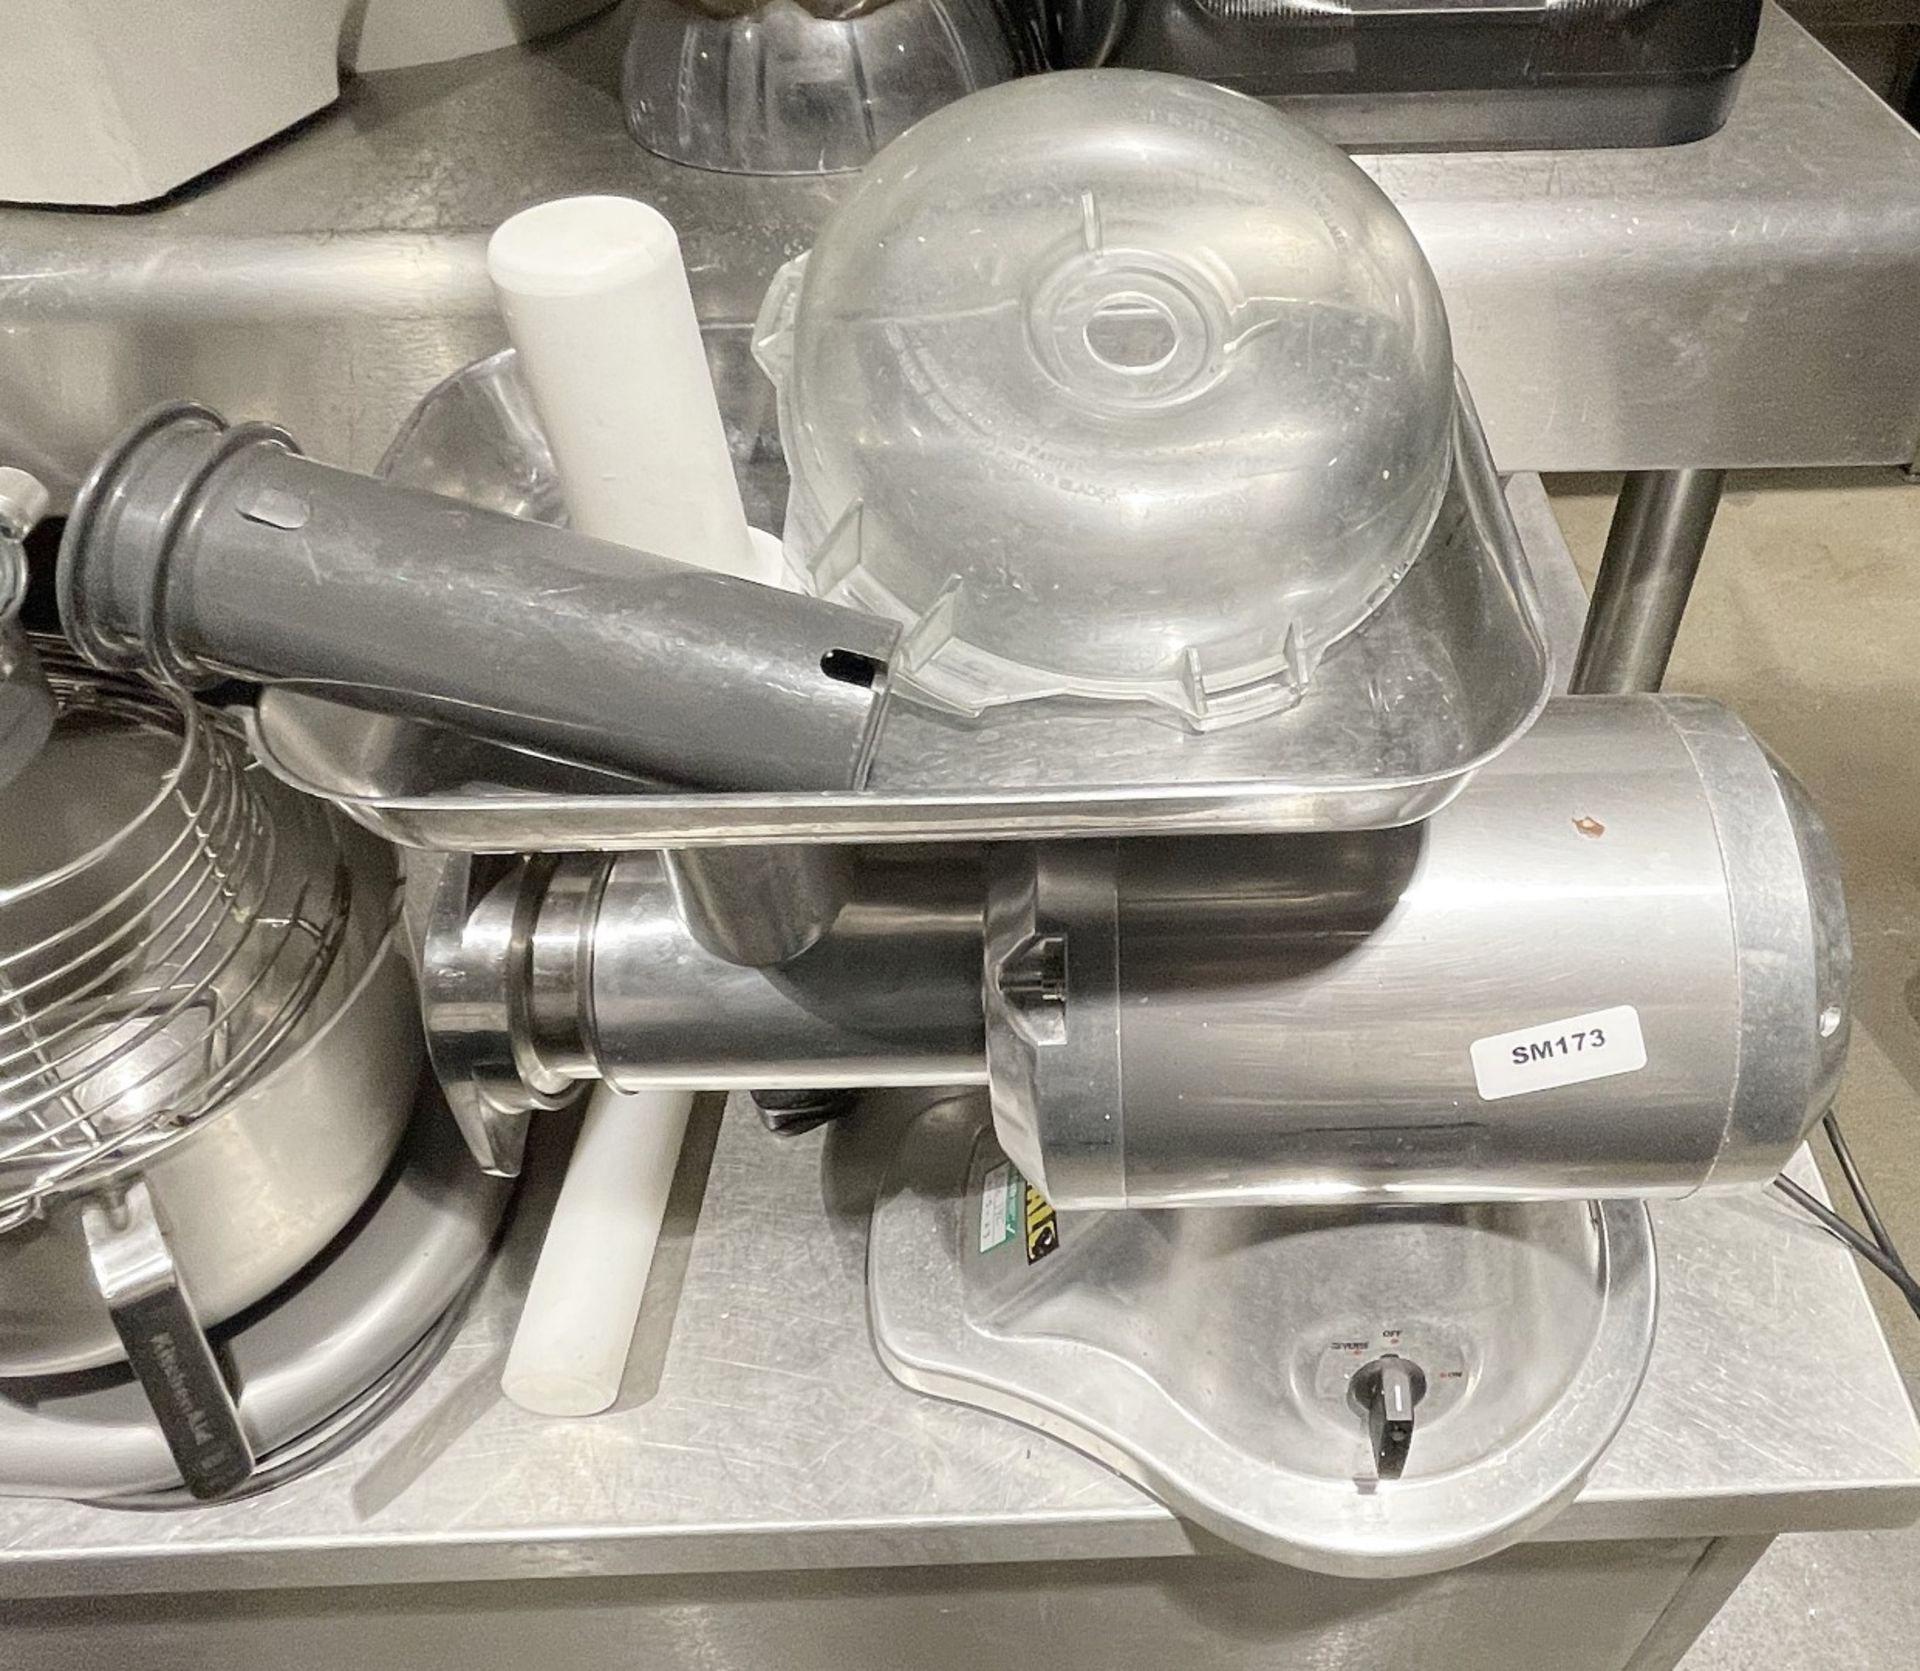 1 x Buffalo CD400 Heavy Duty Meat Mincer Commercial Mincer with Accessories - RRP £770 - Image 11 of 16